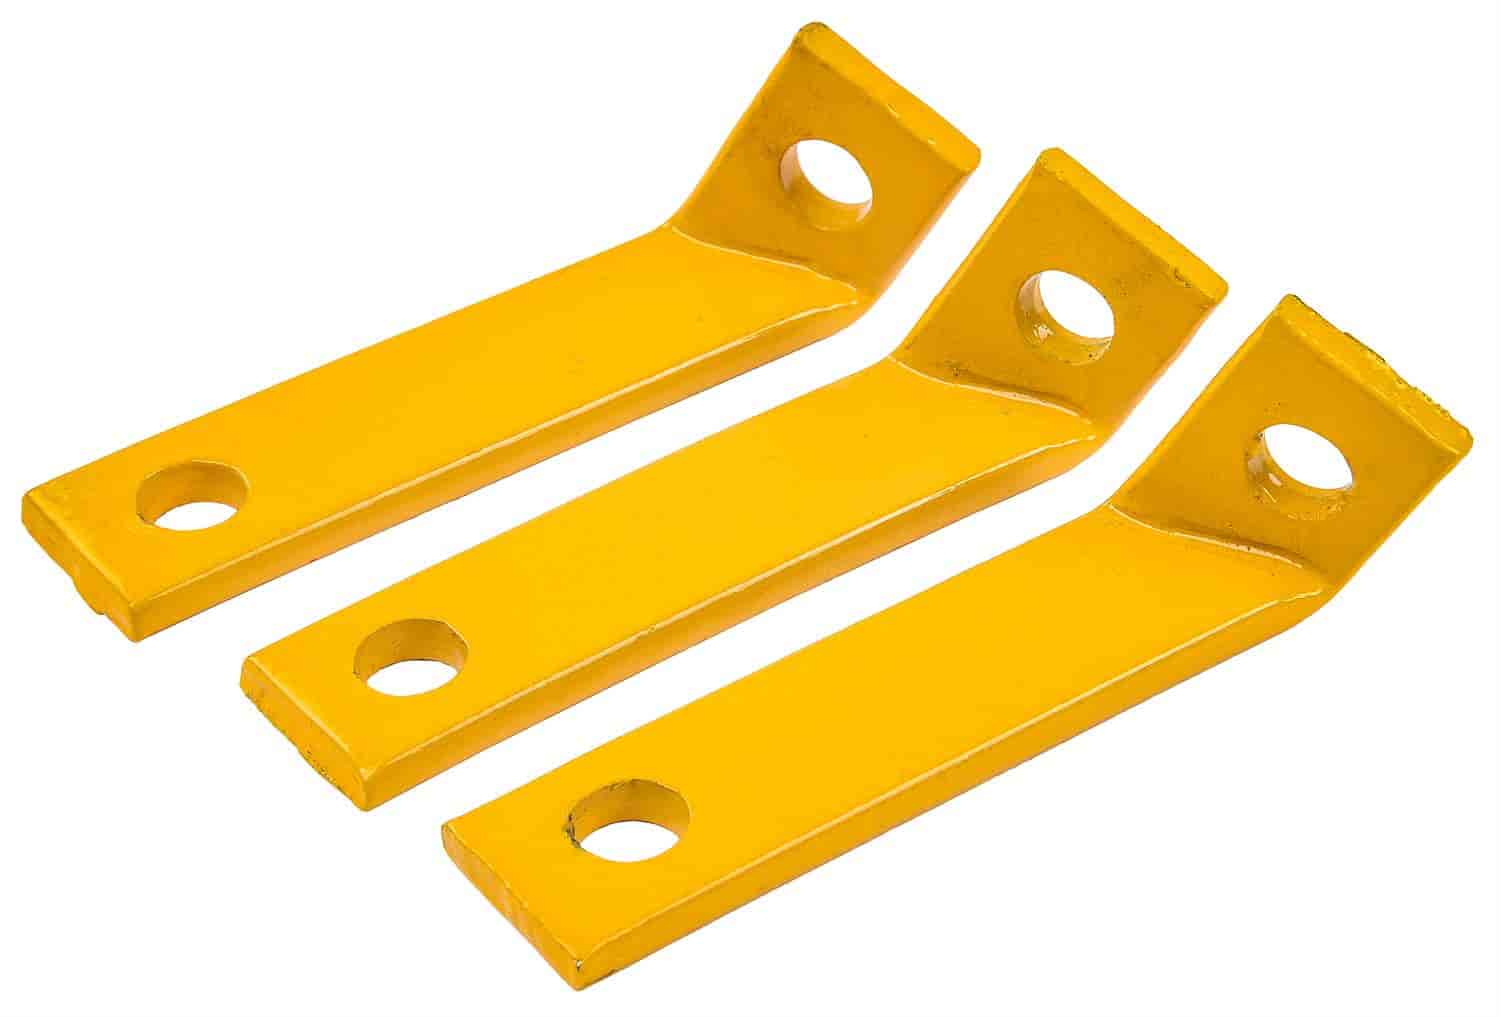 Replacement Short Strap Braces for Under Hoist High Lift Jack Stand 555-80013 [Set of 3]